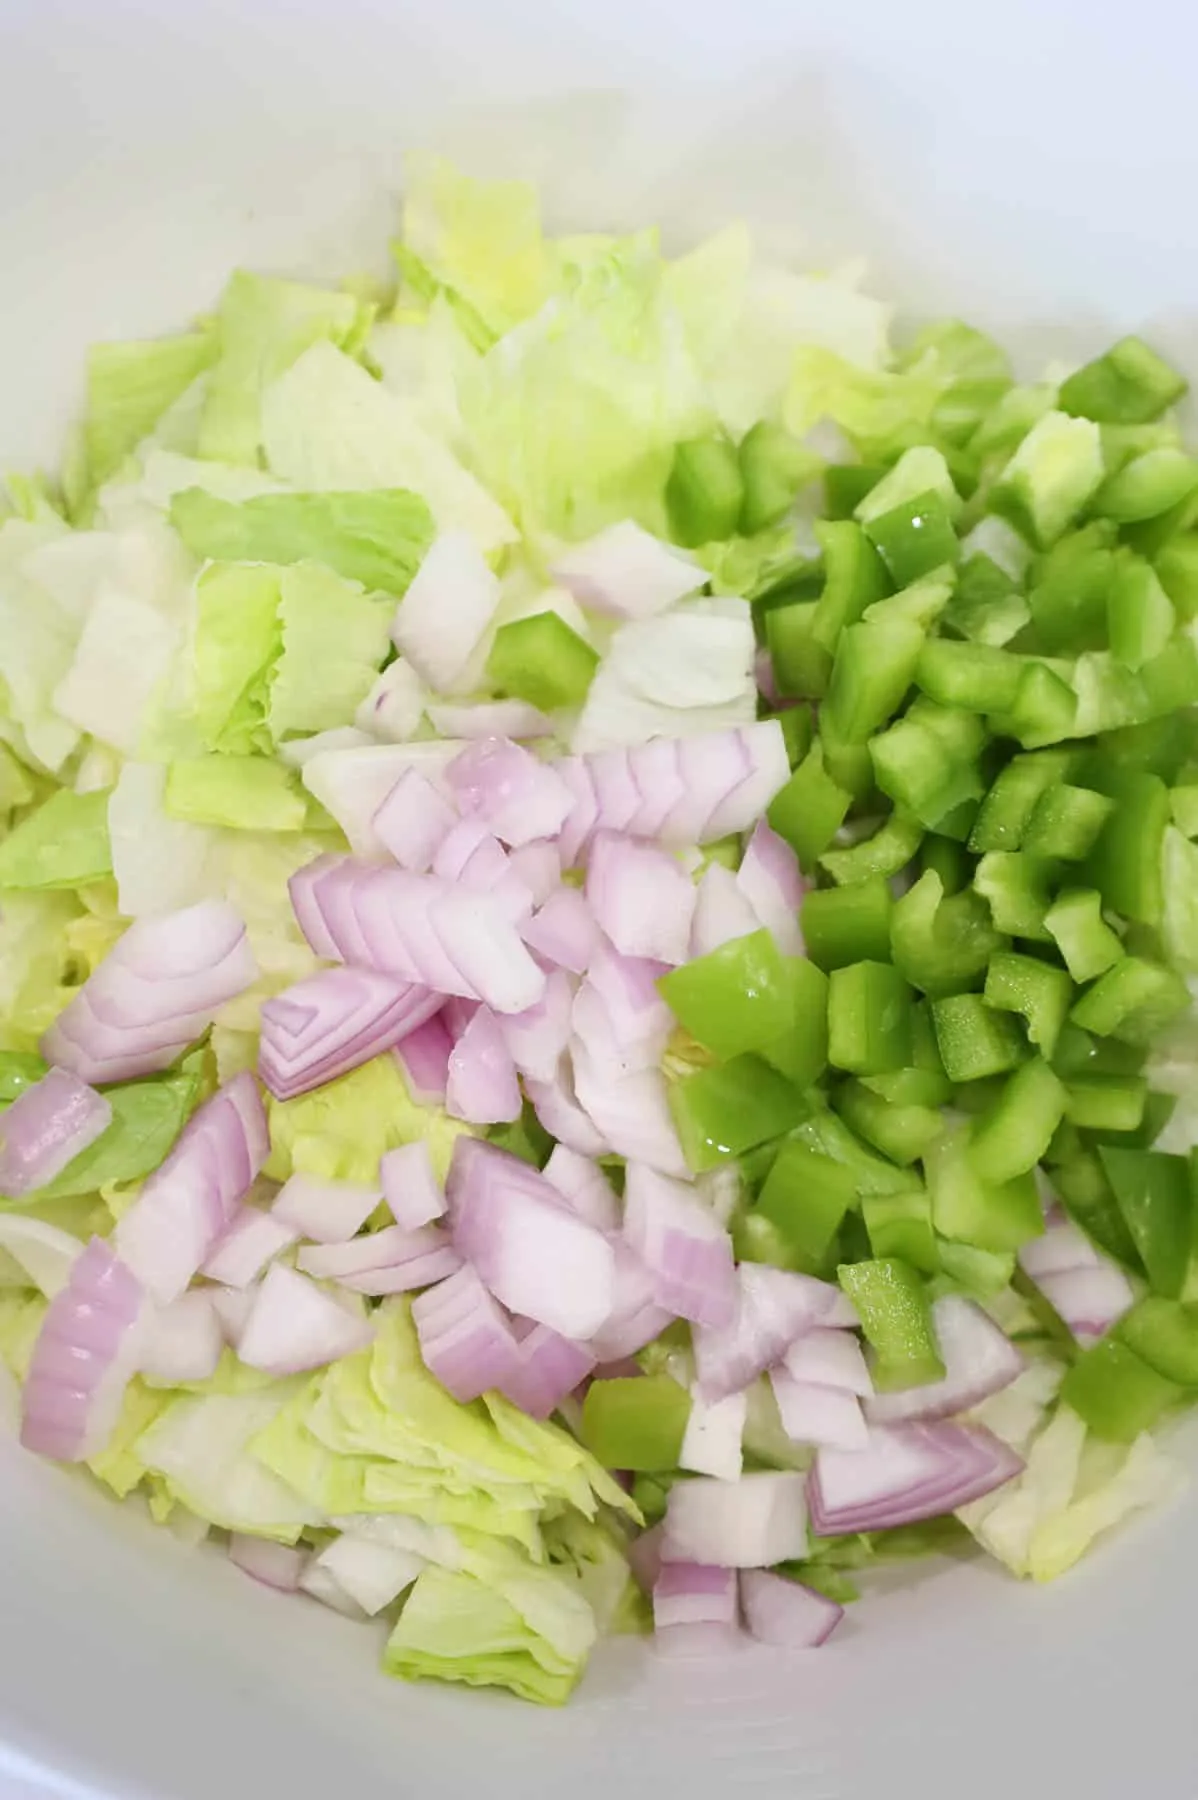 diced green peppers and onions on top of chopped lettuce in a bowl